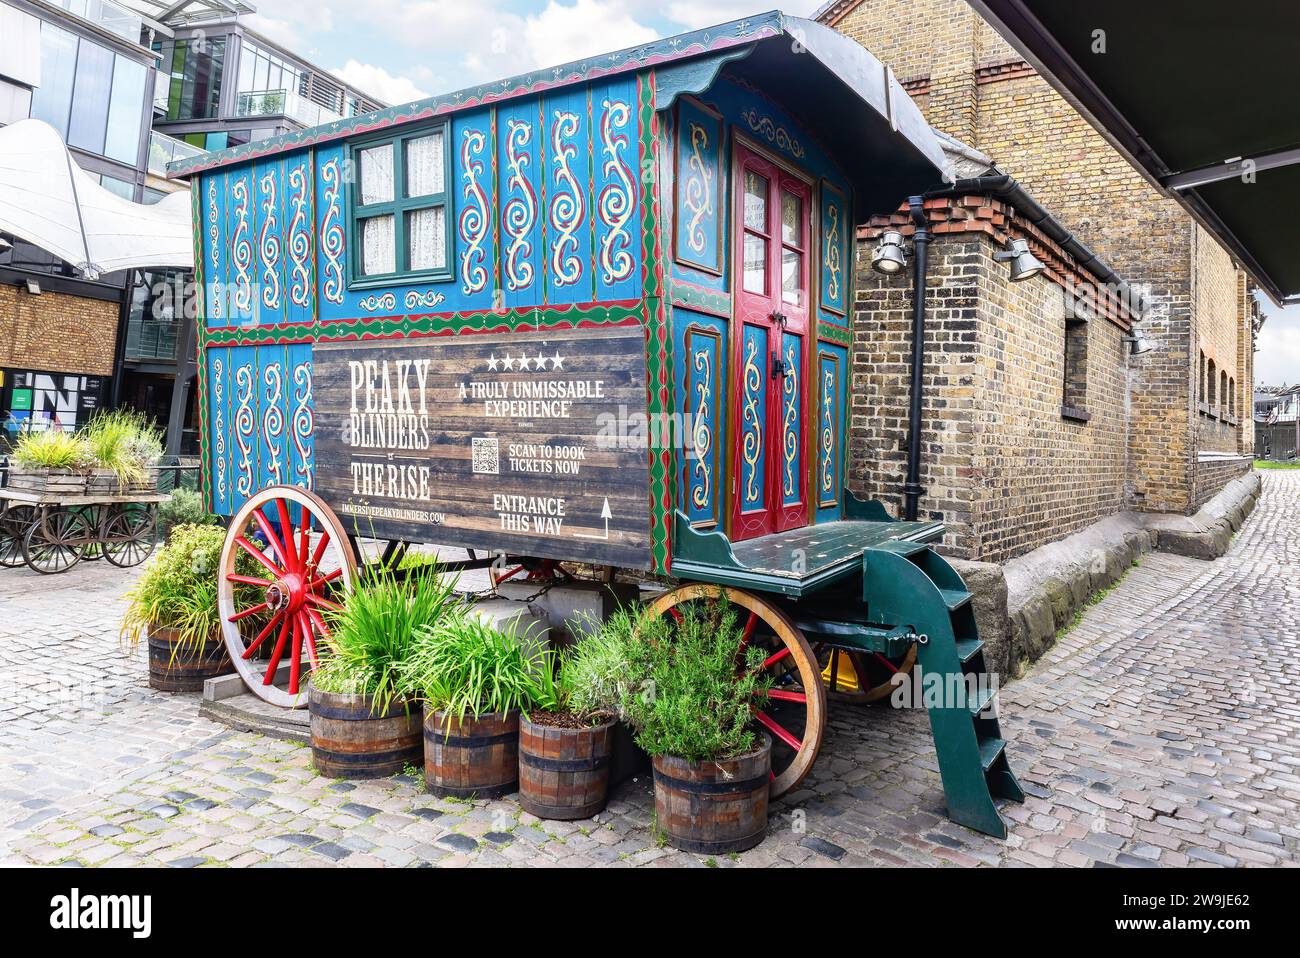 London, UK - May 23, 2023: Peaky Blinders carriage as immersive experience in Camden Town Market, London, England United Kingdom Stock Photo